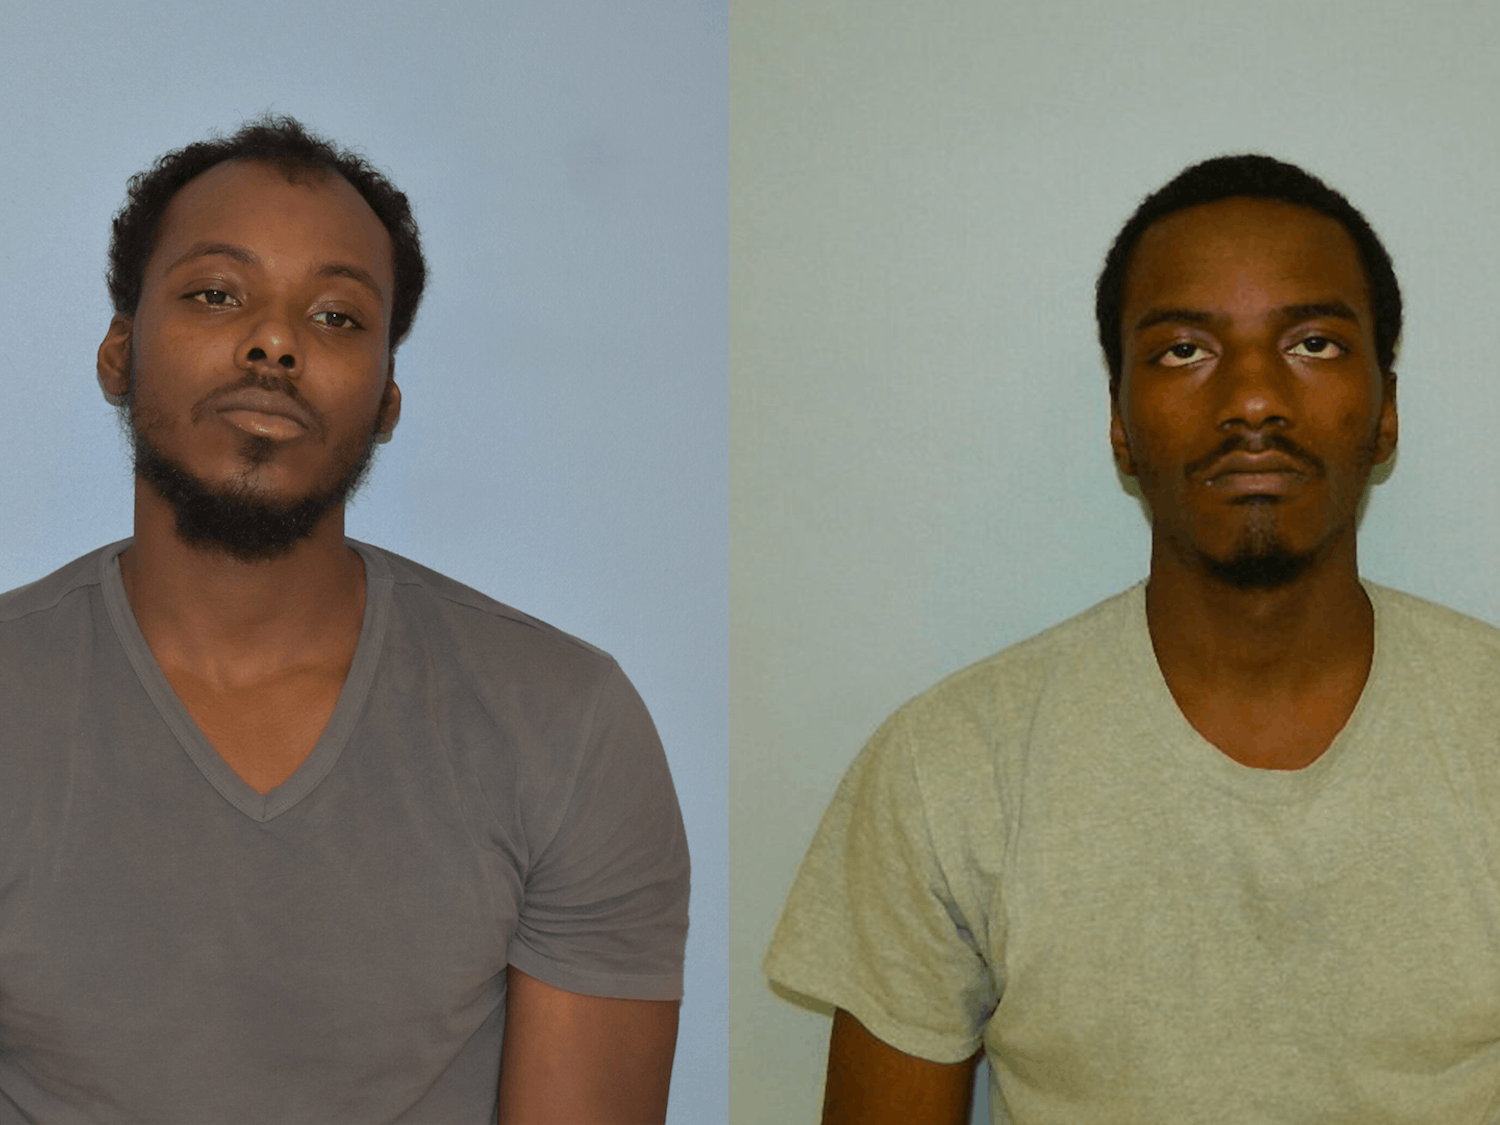 Christian N. Brown, 30 years old from New York, New York, and Michael A. Priester, 21 years old, from Columbia, South Carolina are being charged for an Auburn robbery.